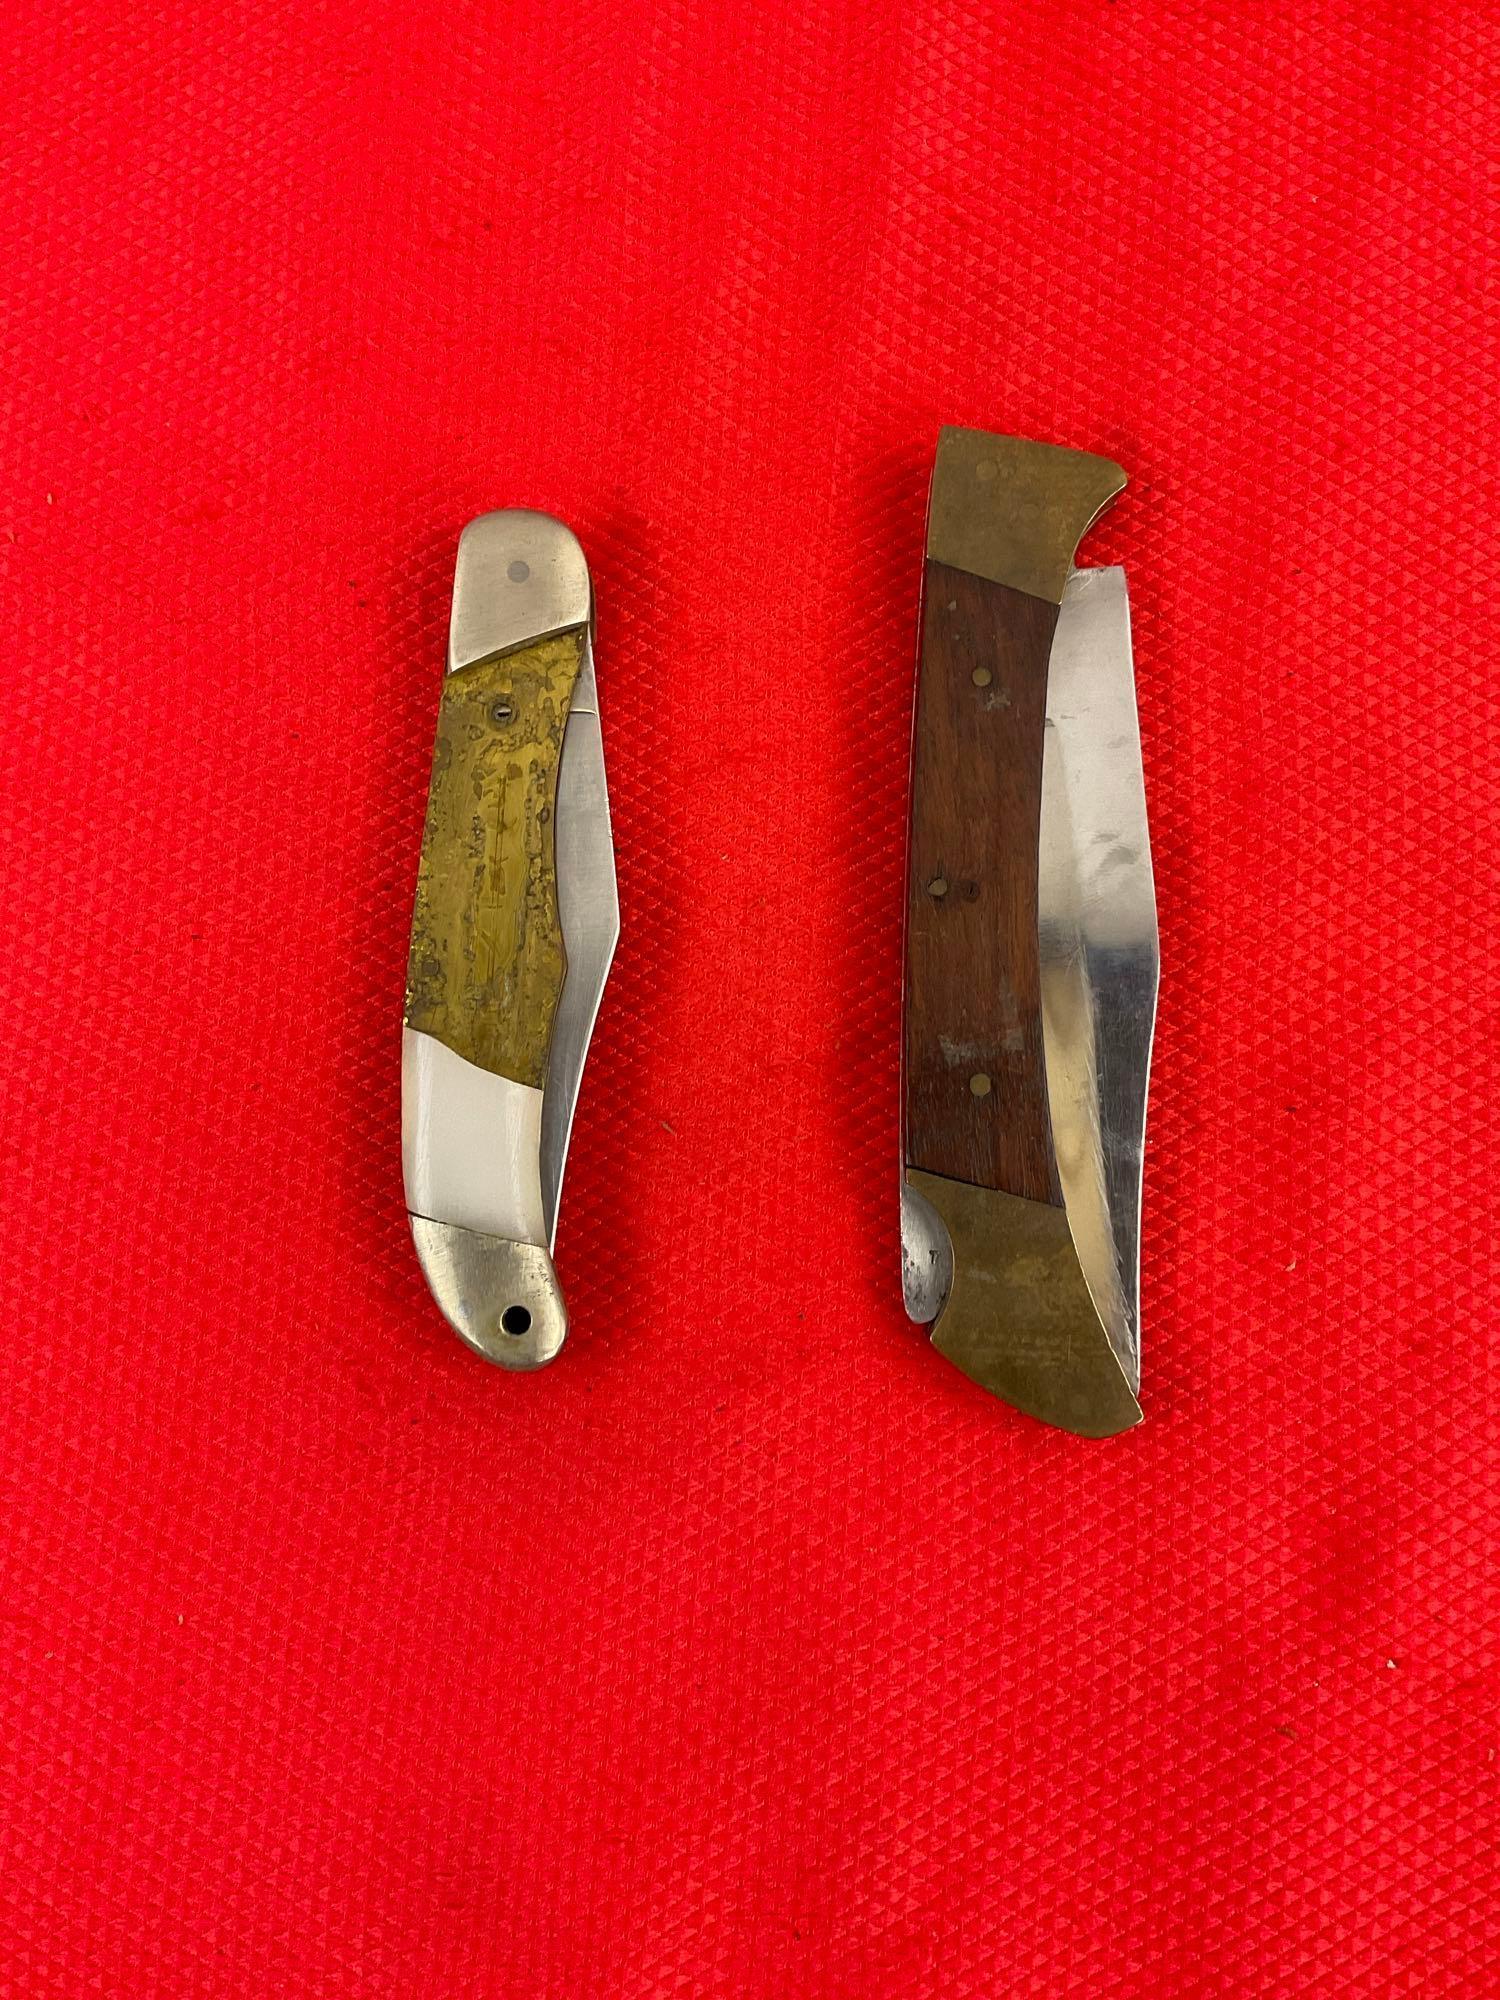 2 pcs Vintage Steel Folding Blade Knives. 1x Buck 317 & 1x Unknown Maker, No Hallmark. As Is. See